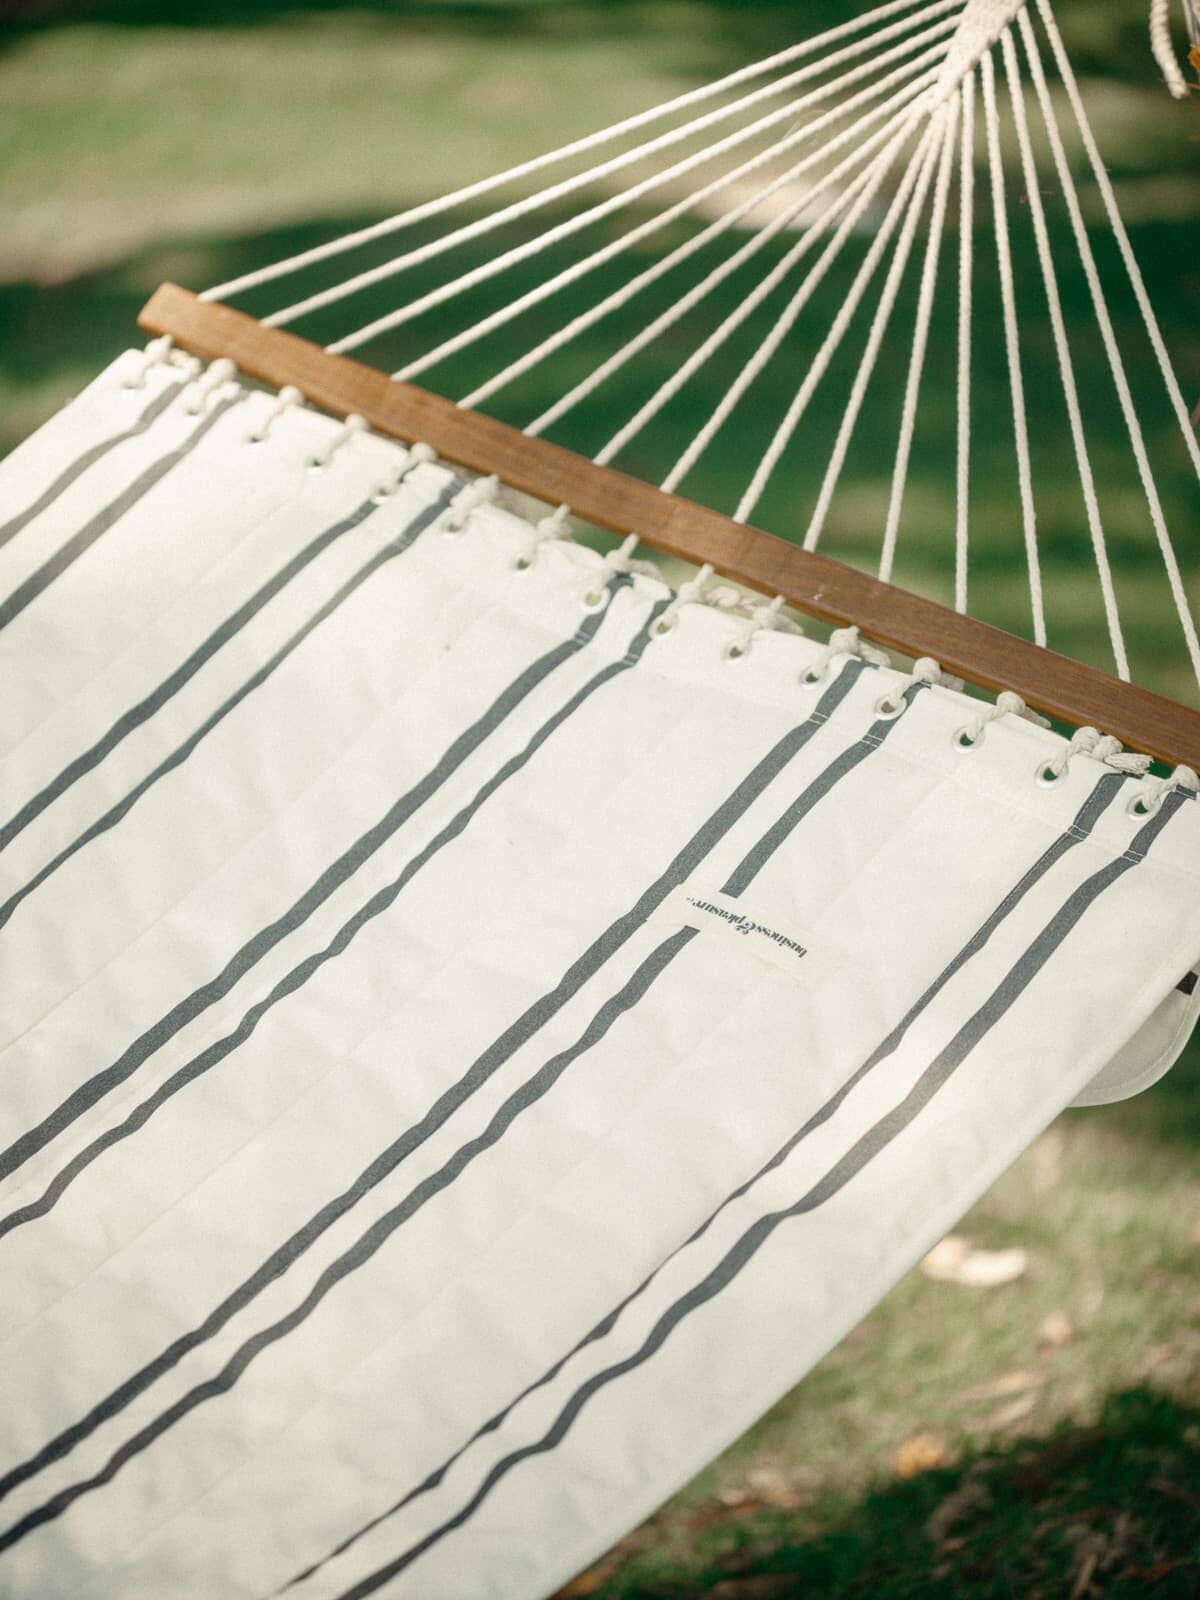 close up of hammock detail and rope attachment